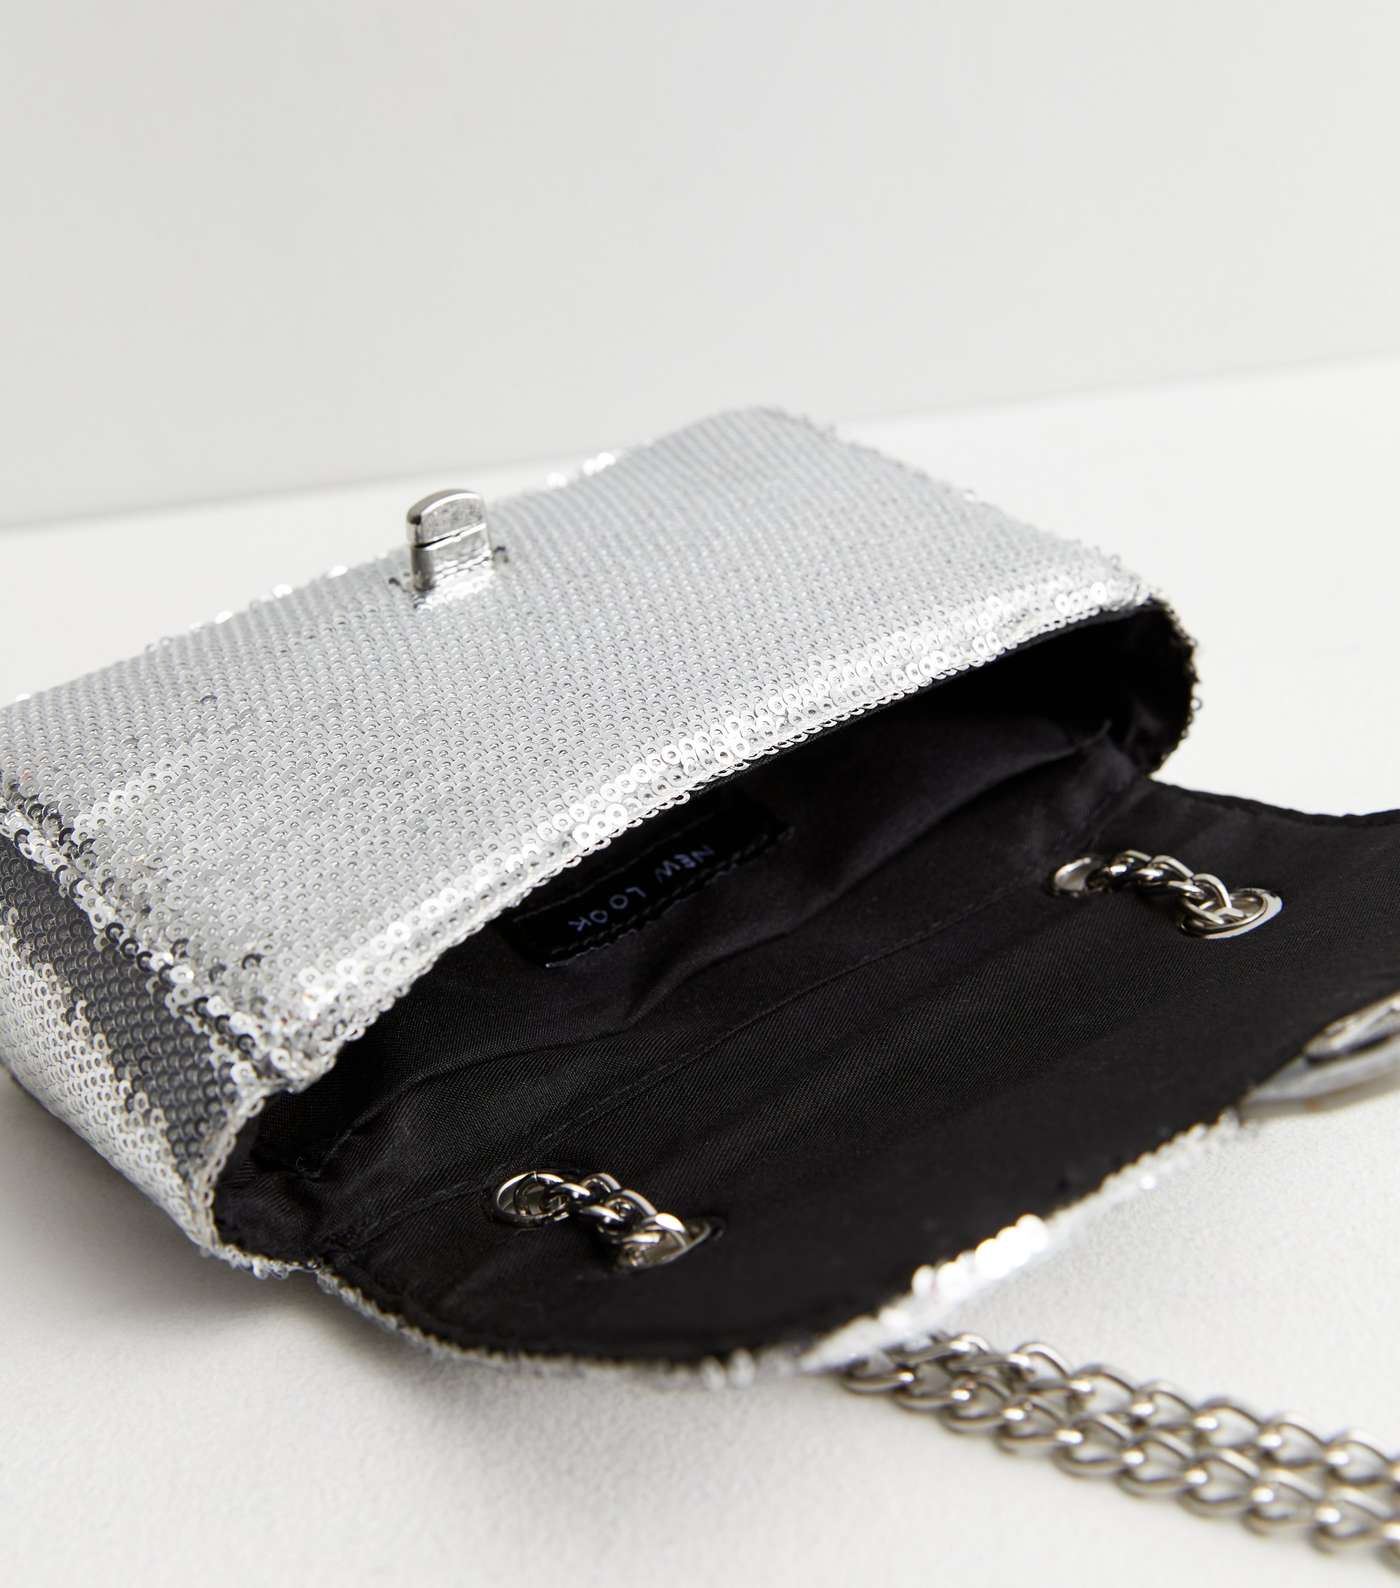 Silver Sequin Chain Cross Body Bag Image 4